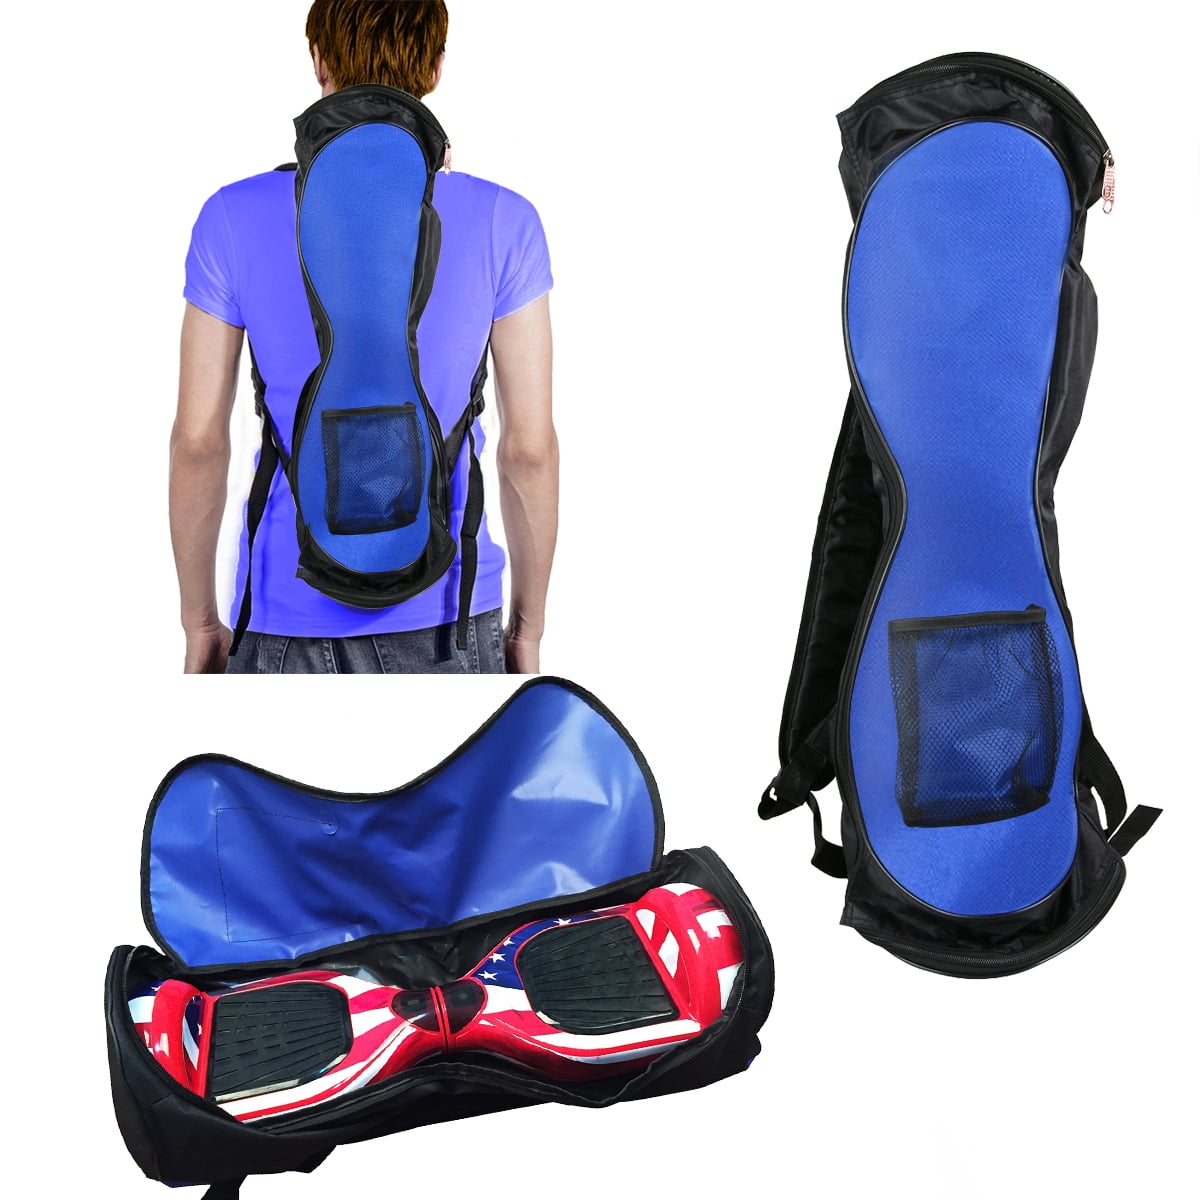 New 2 Wheel 8' Self Balancing Hover Board Carry Bag Blue 